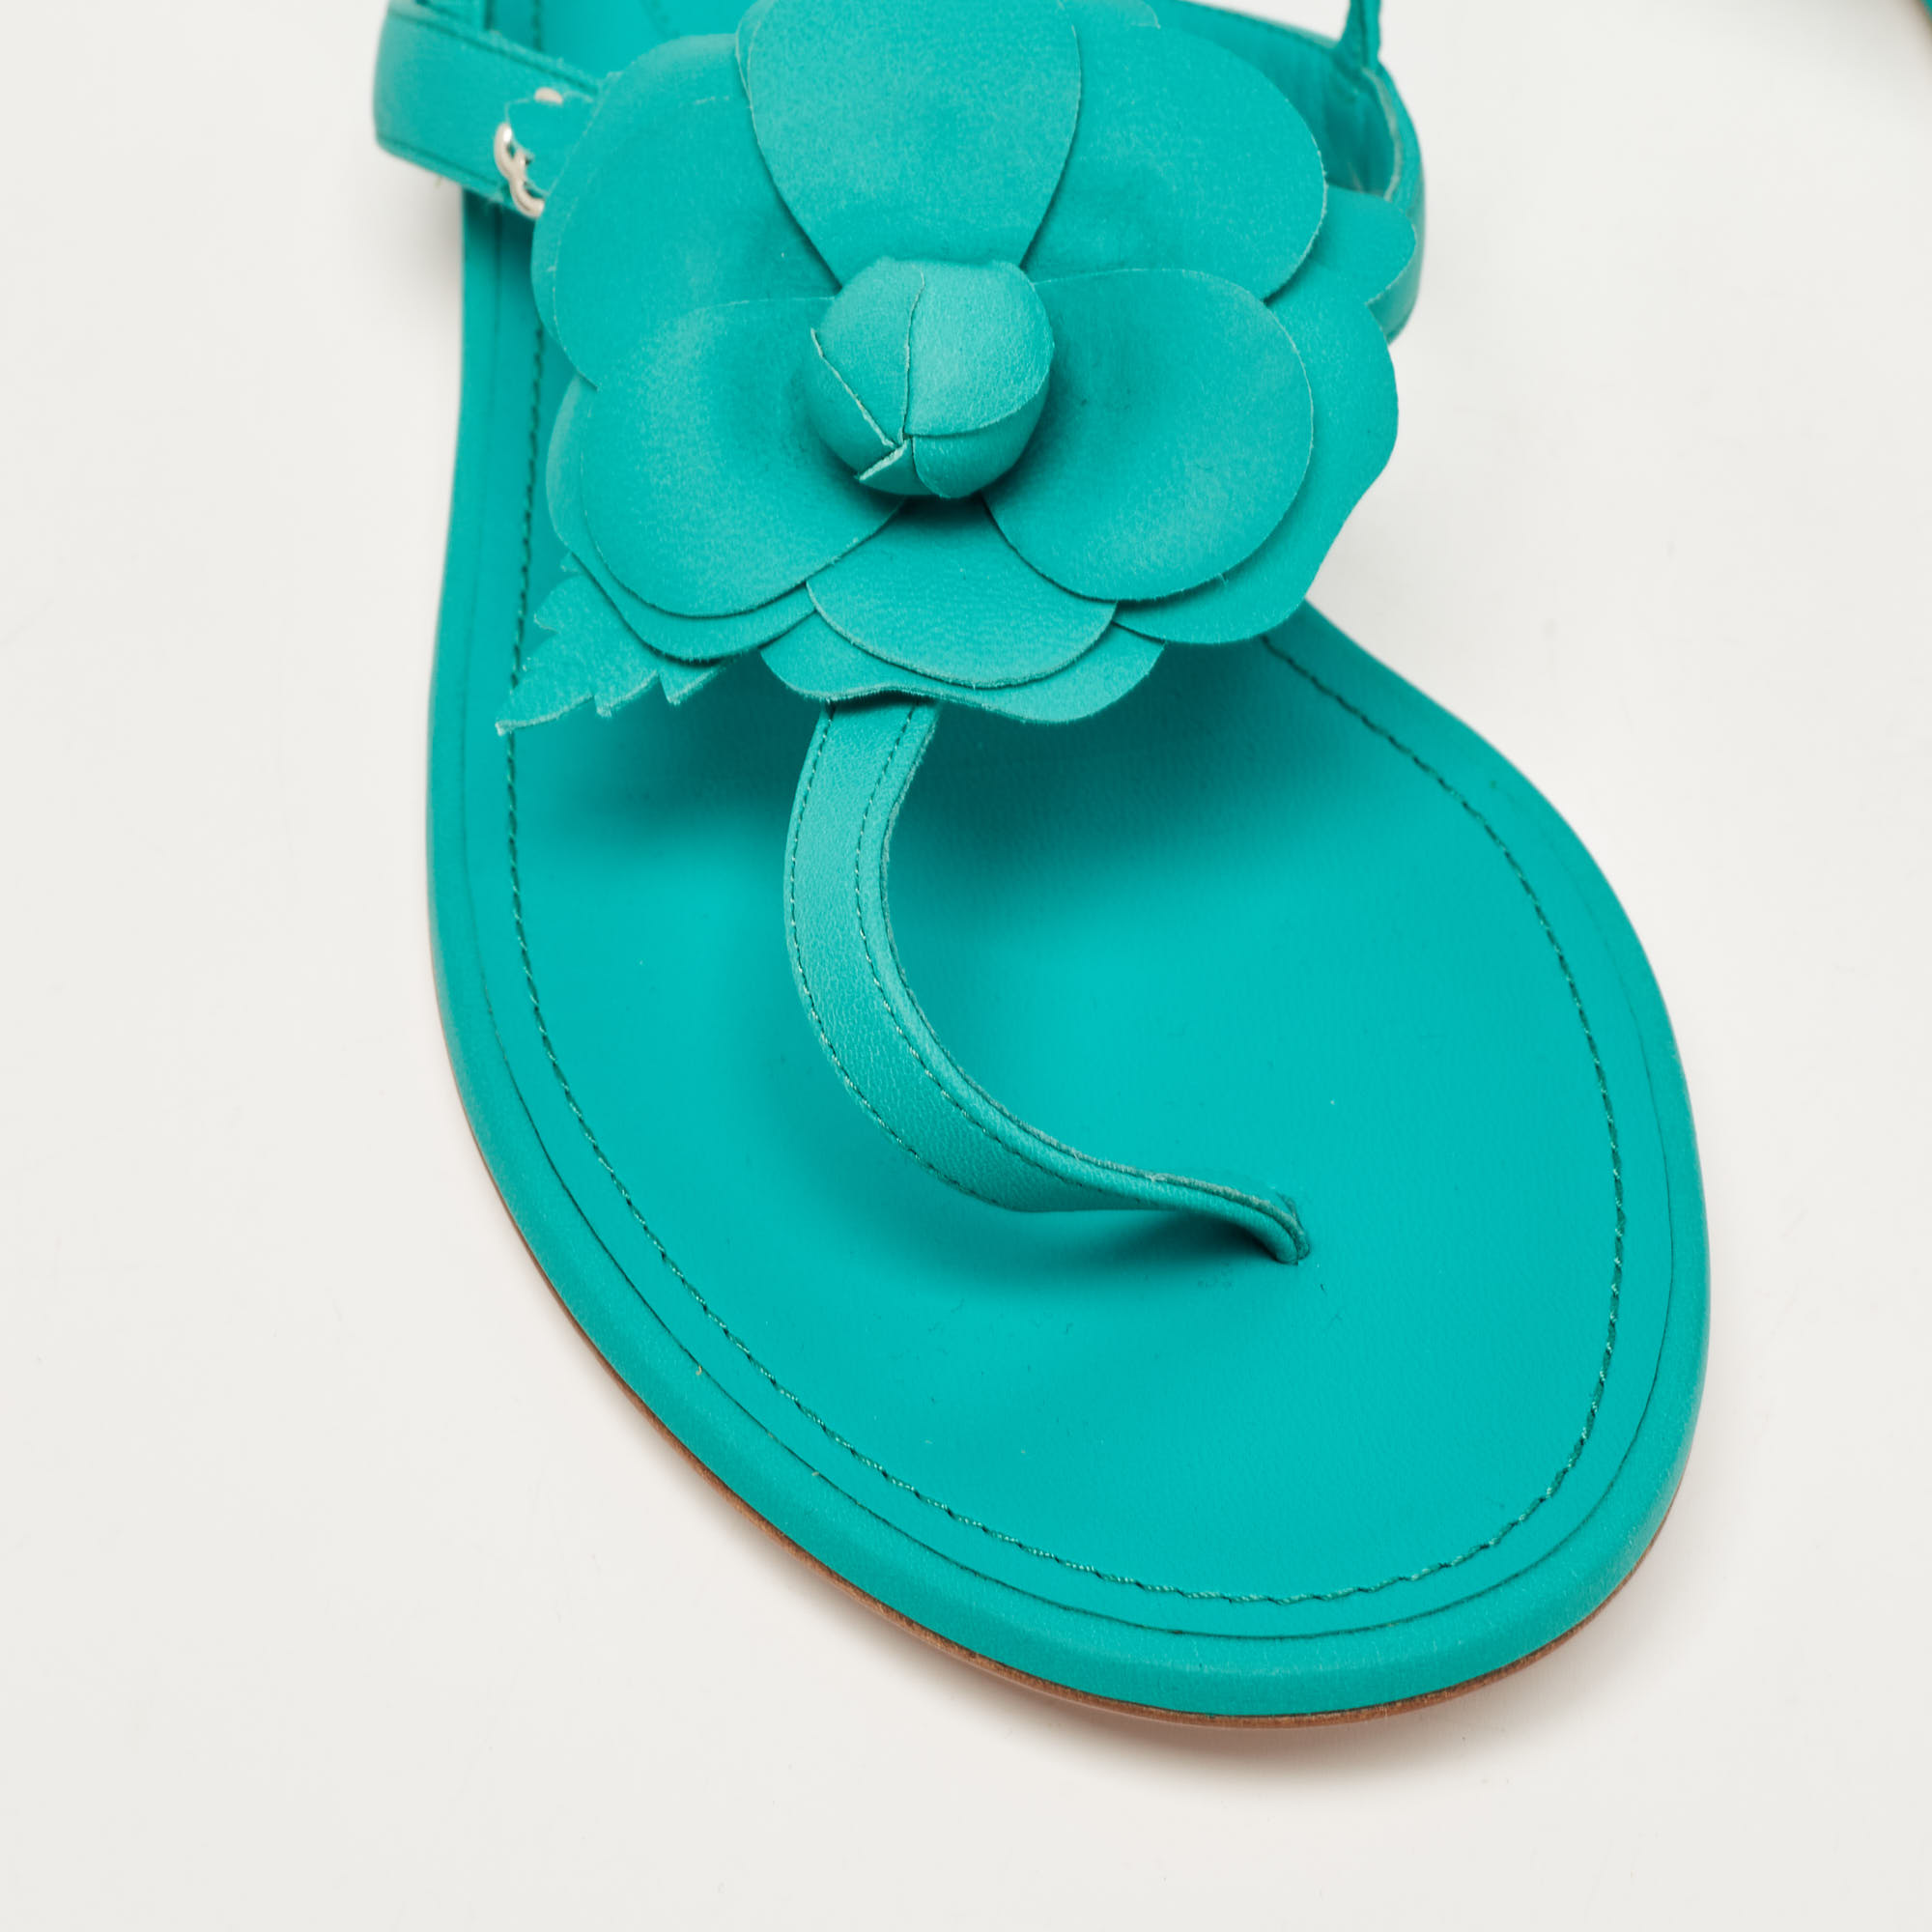 Chanel Green Leather Camellia Thong Sandals Size 40